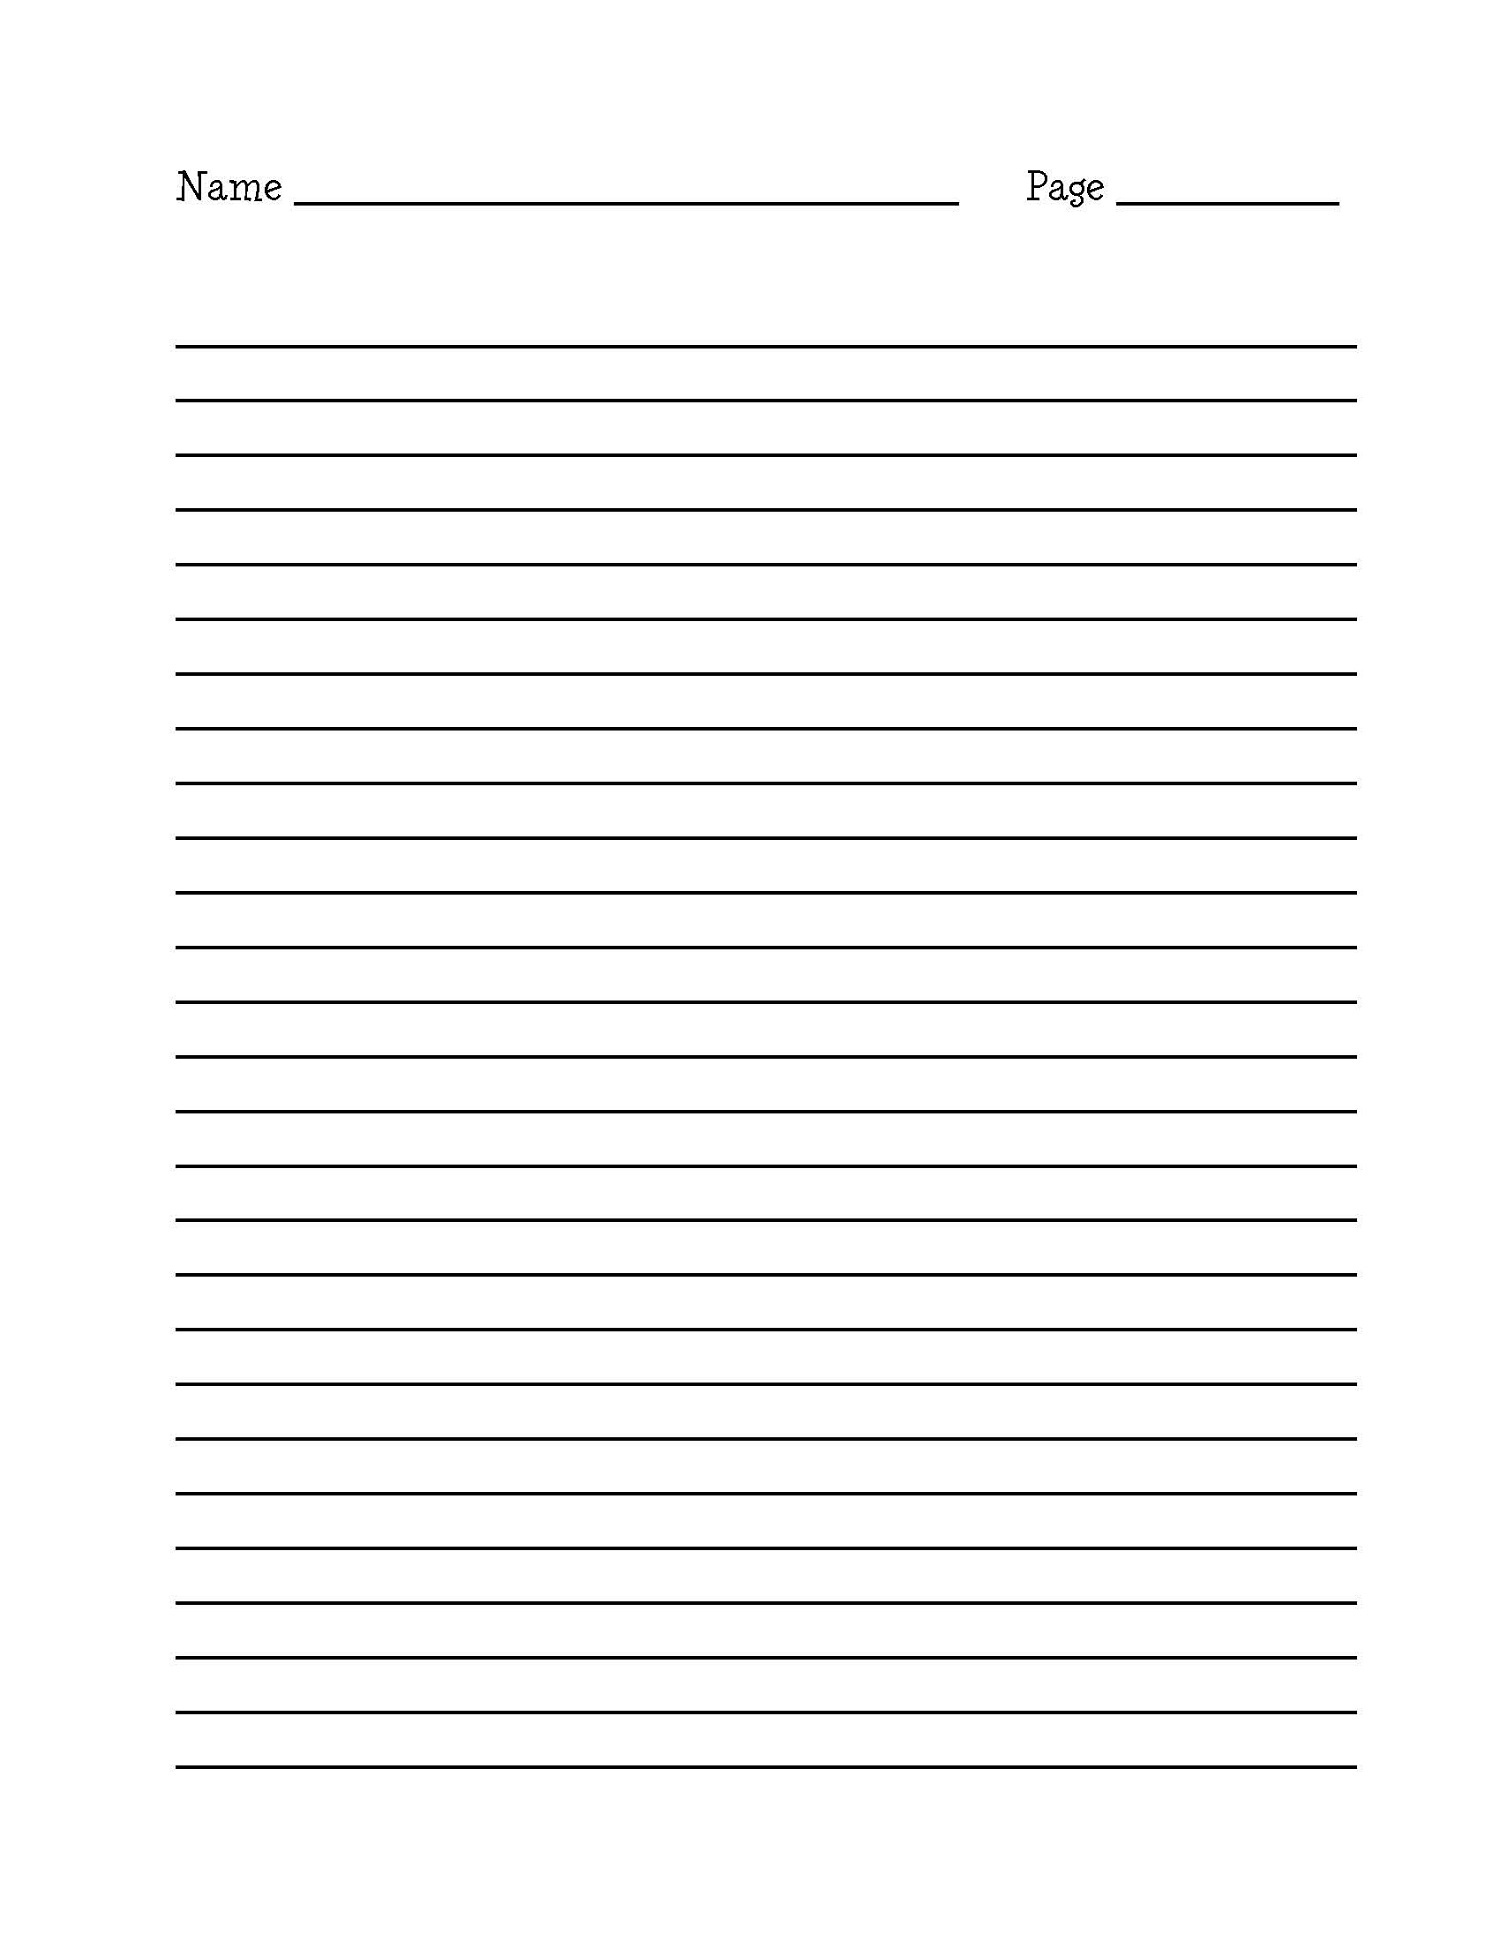 Printable Writing Paper With Border - Floss Papers - Elementary Lined Paper Printable Free